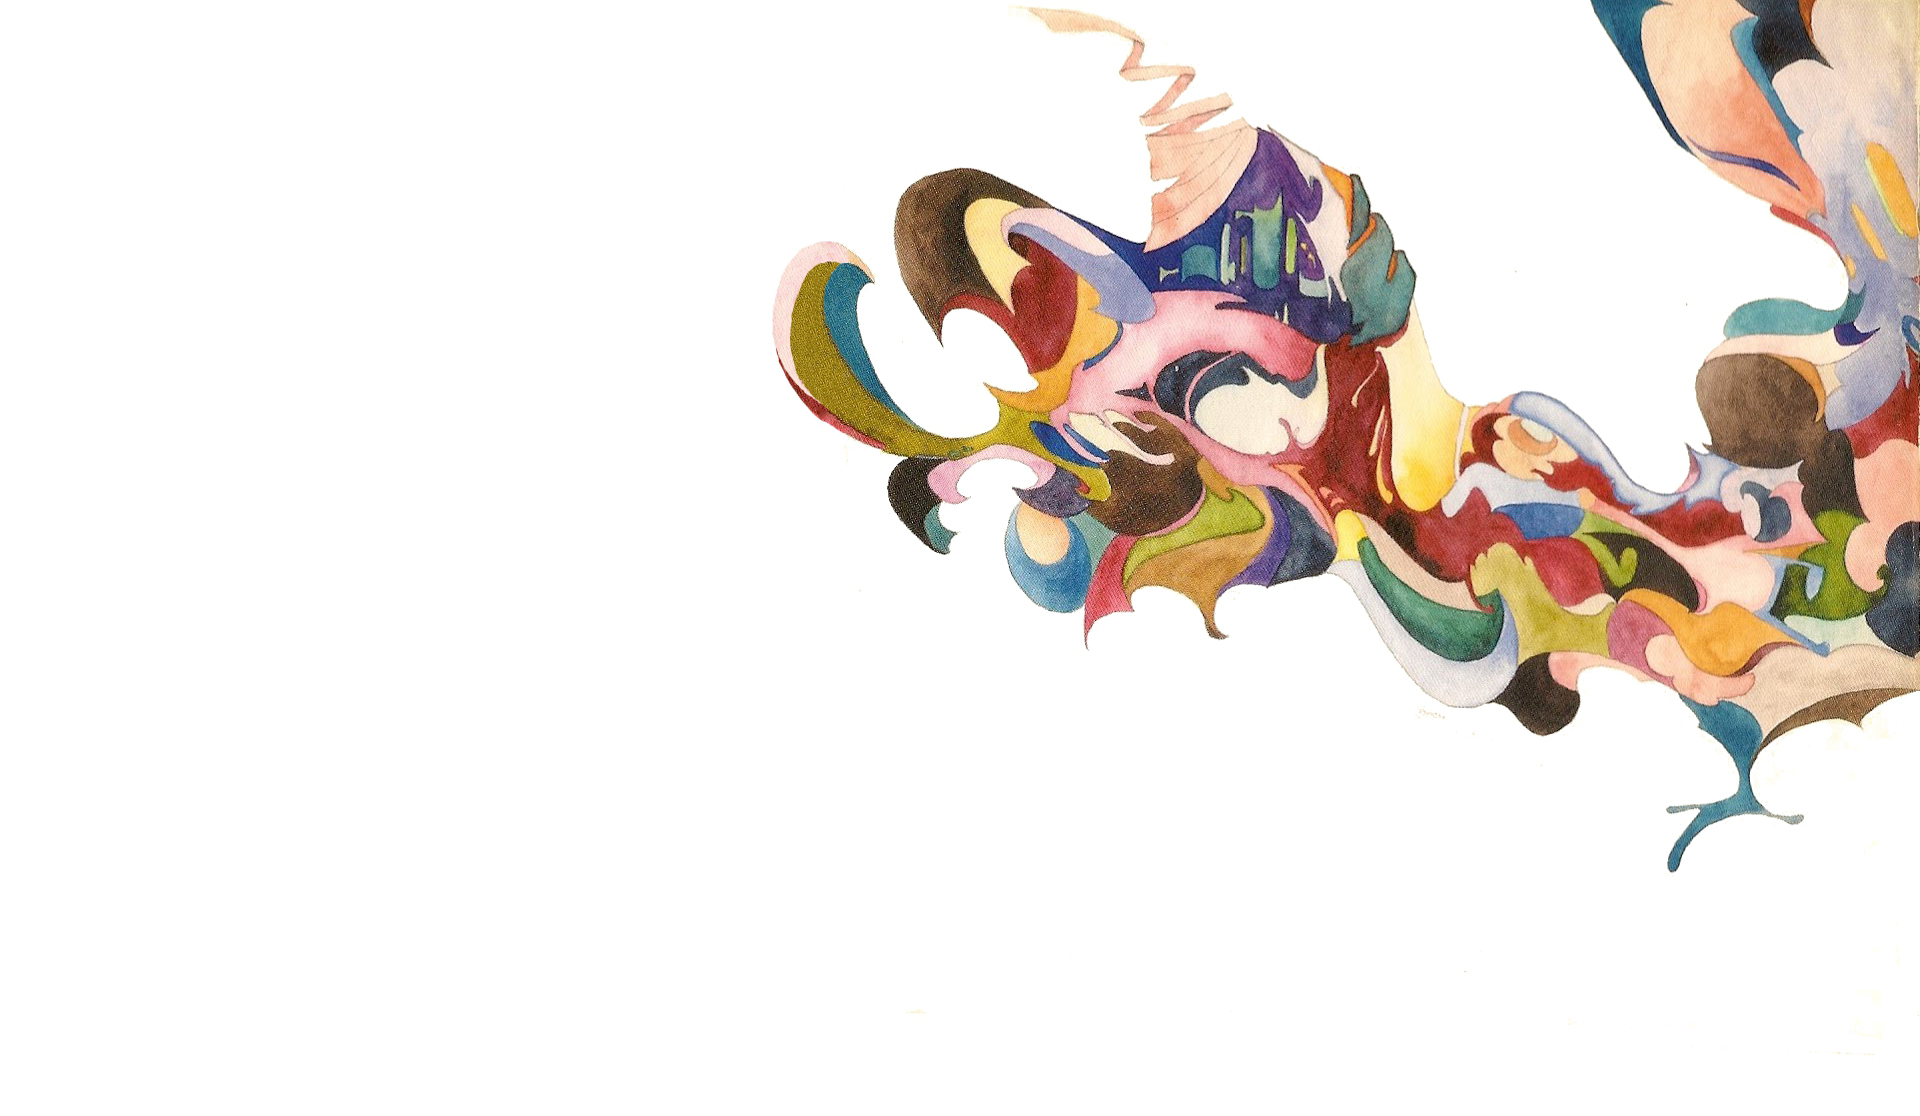 Nujabes Abstract Wallpaper